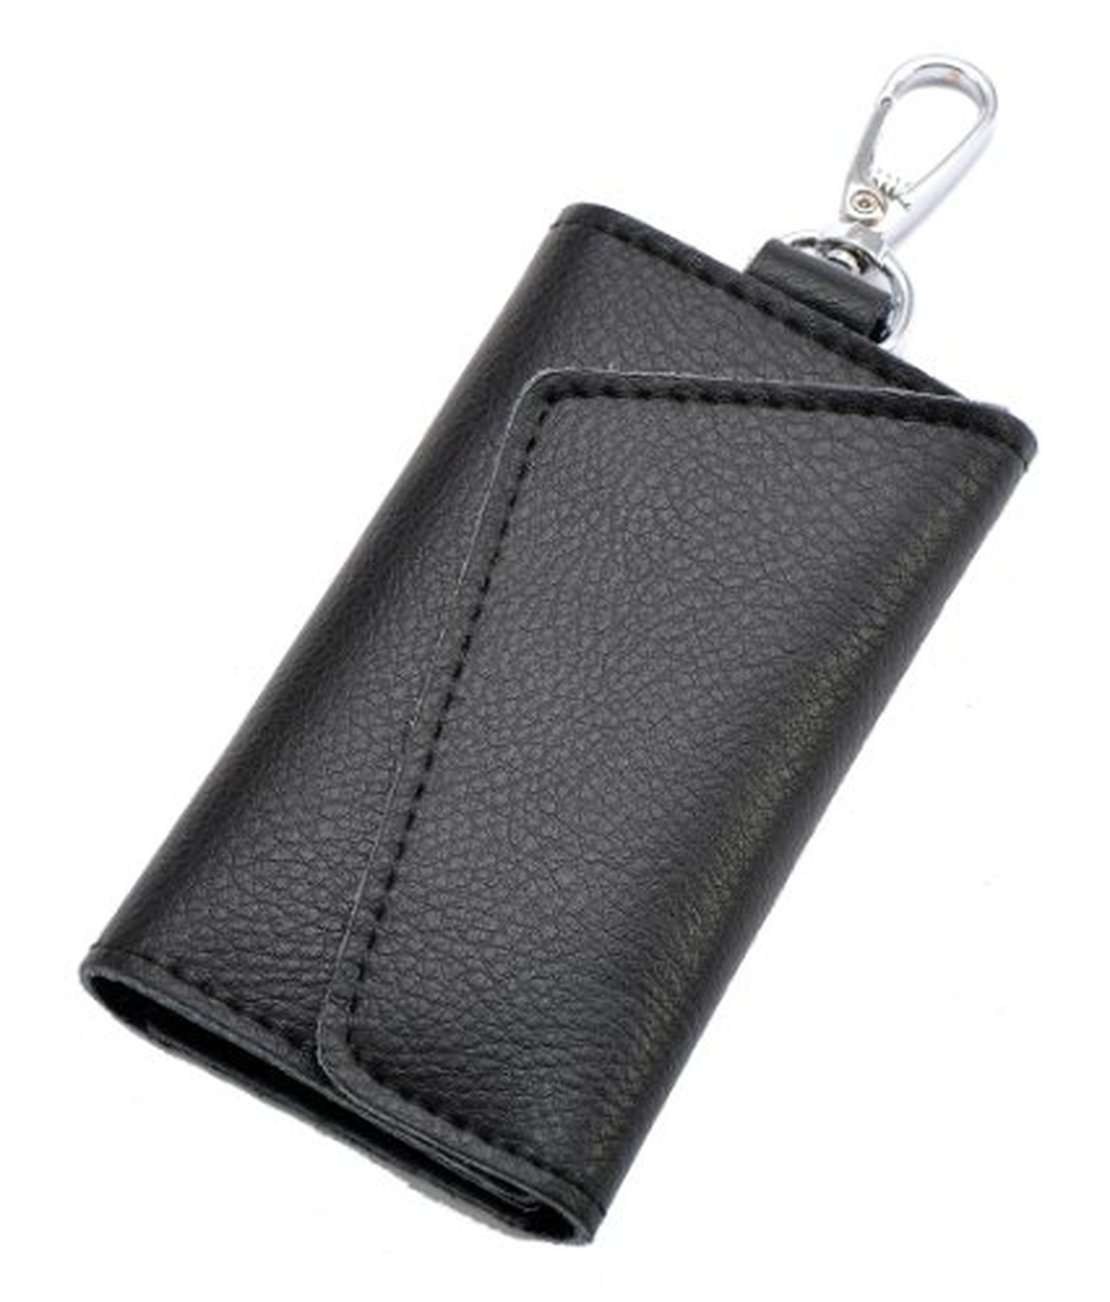 A review of the Heshe Key Case Wallet | LeatherWallets.org